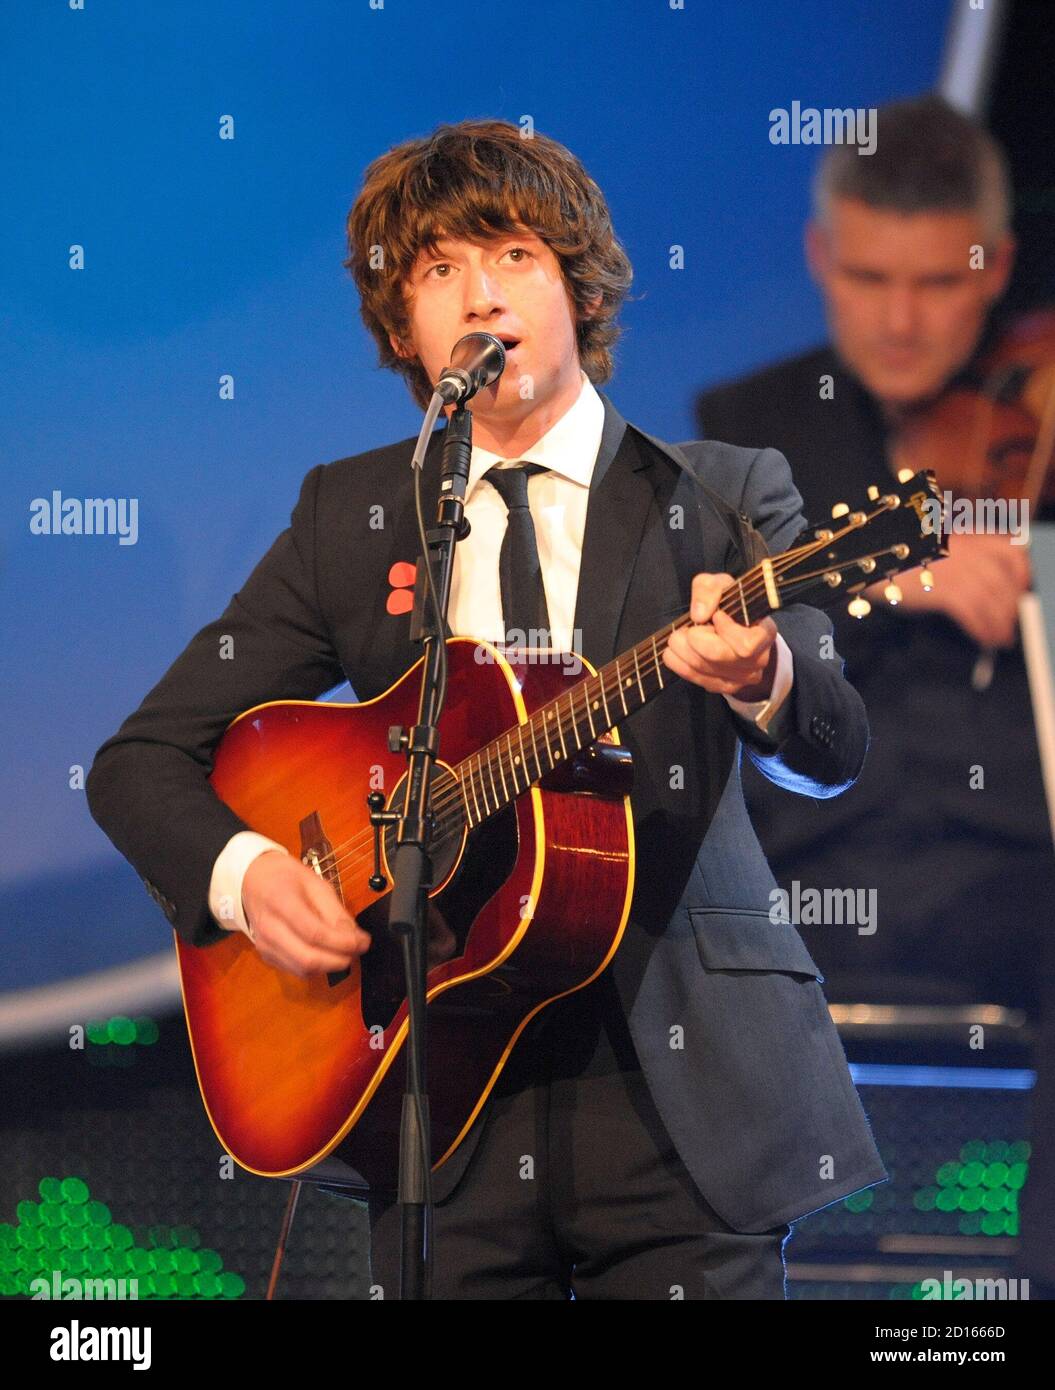 Alex Turner of the Last Shadow Puppets, performs at the Nationwide Mercury  Prize awards, in London on September 9, 2008. The Last Shadow Puppets were  nominated, amongst others, for the prize. REUTERS/Kieran